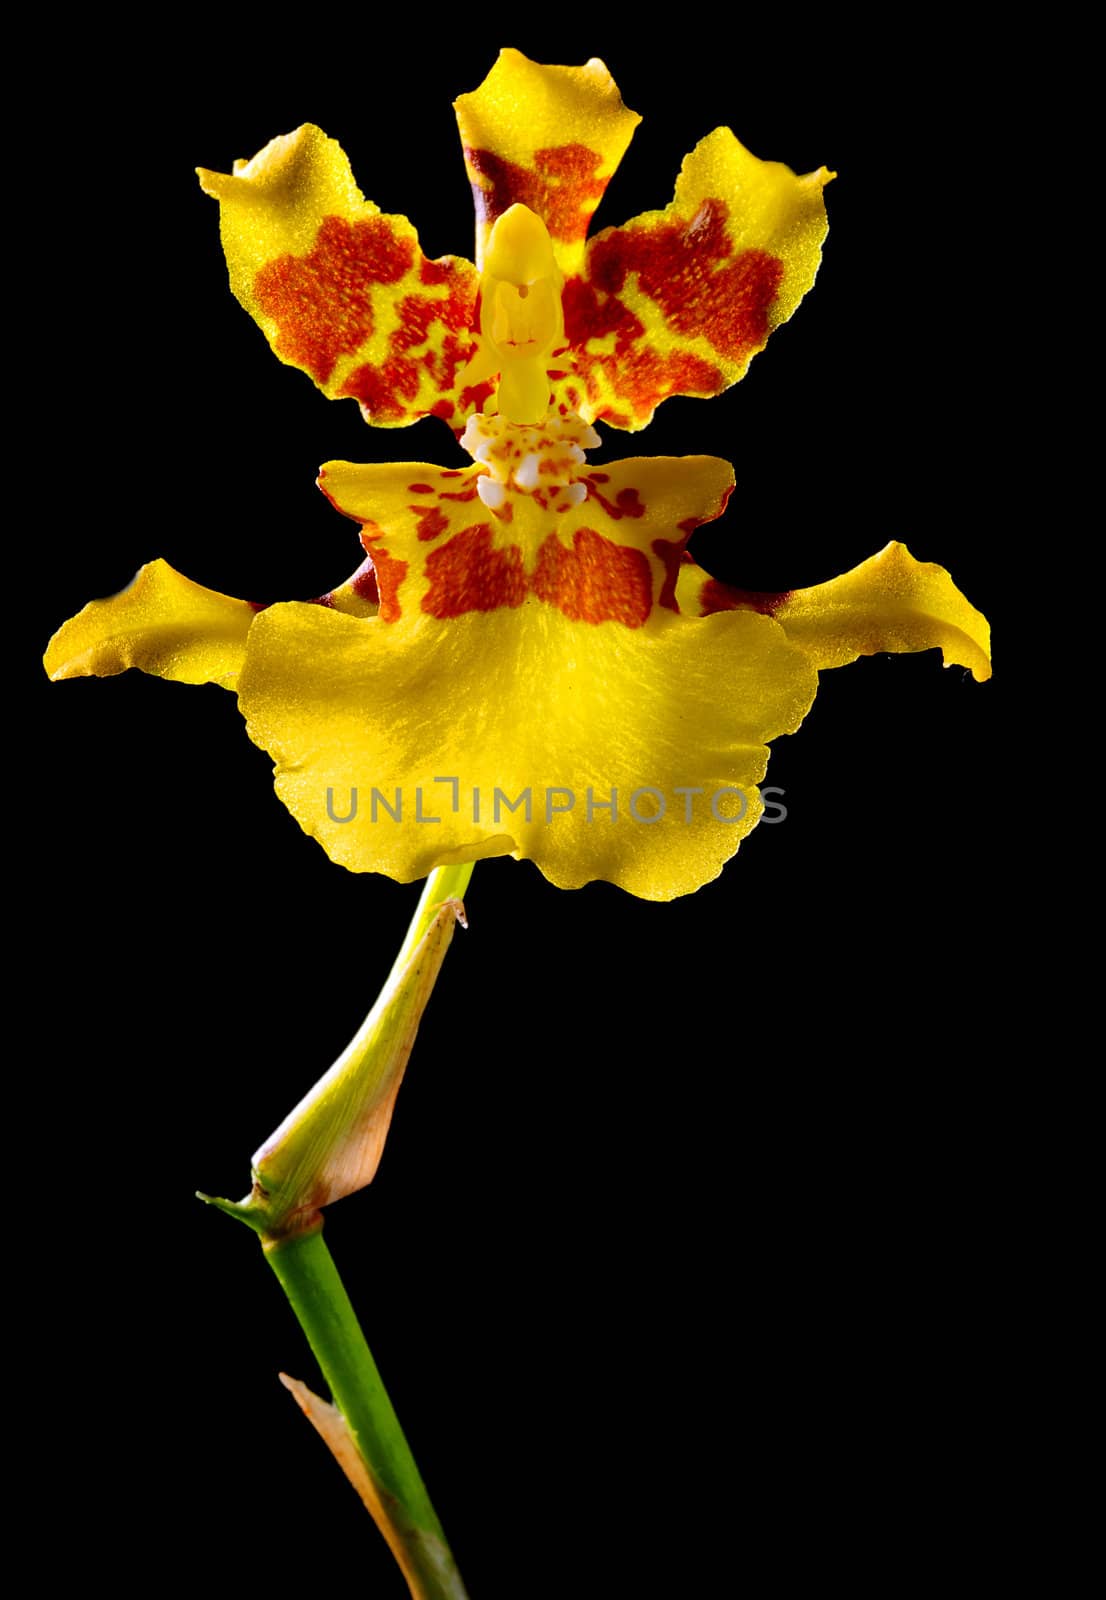 yellow orchid flower on black background by ftlaudgirl